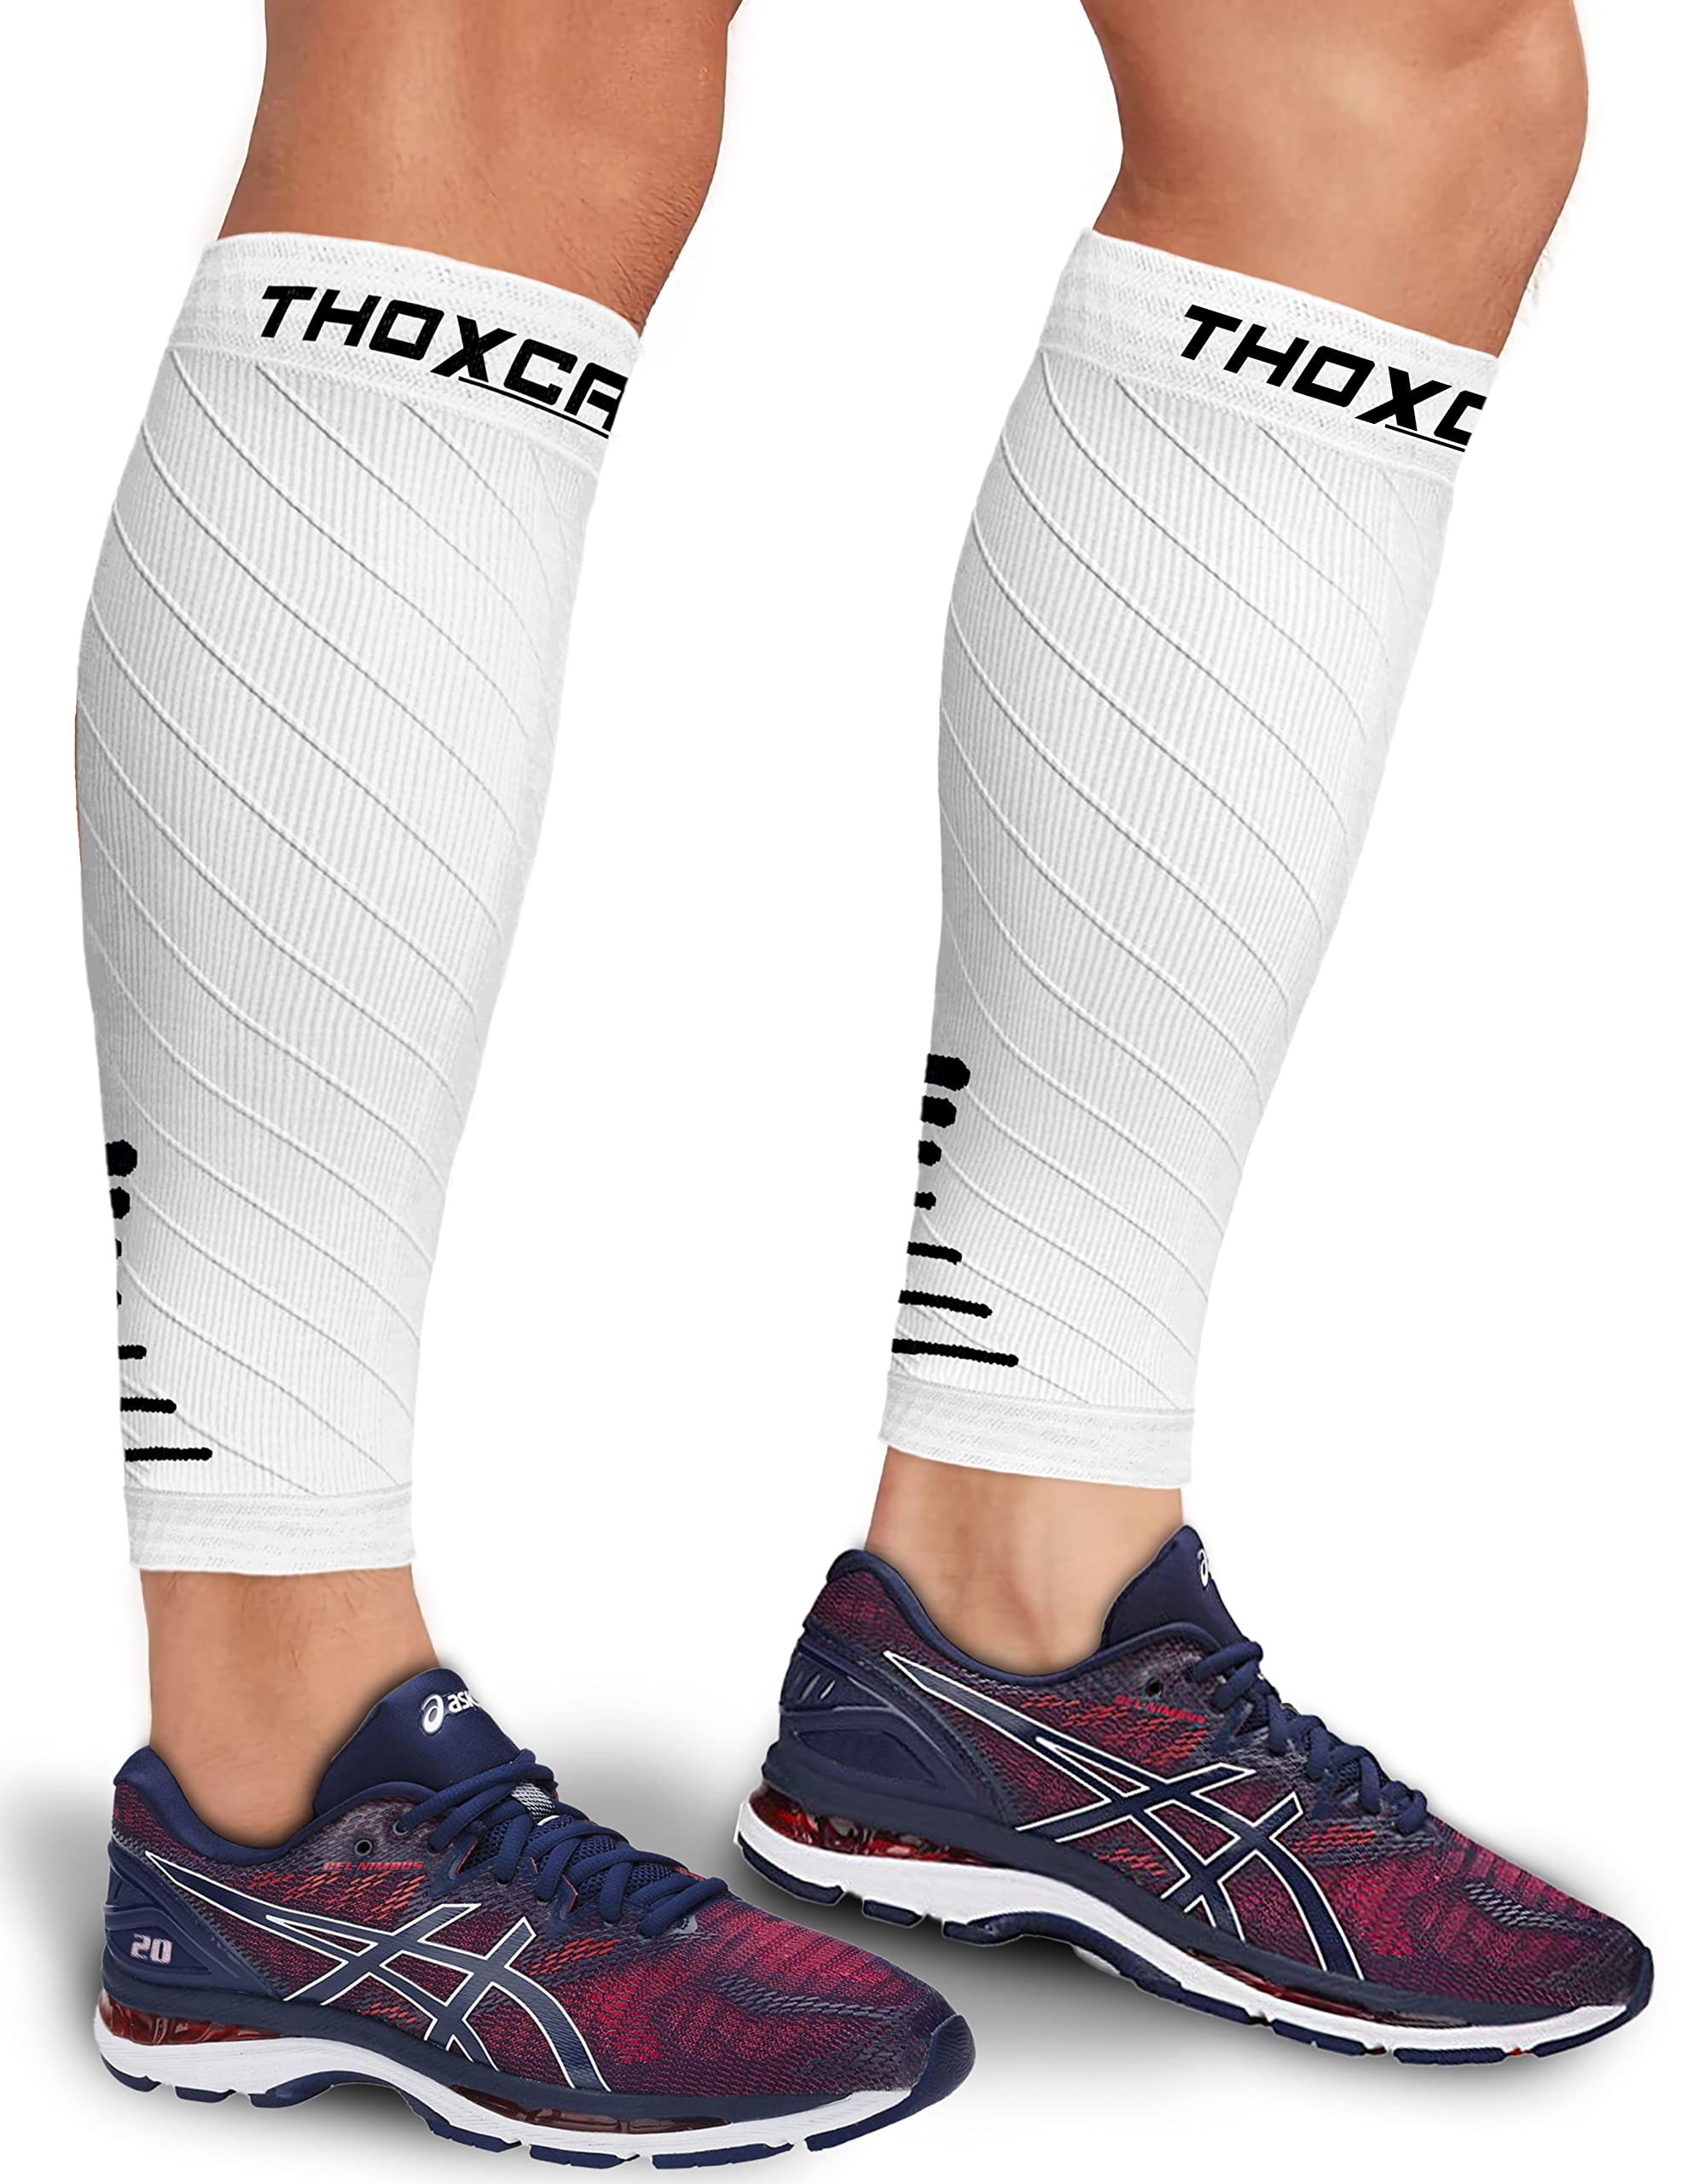 Thoxcare Calf Compression Sleeve for Men Women (1 Pair), Leg Support ...